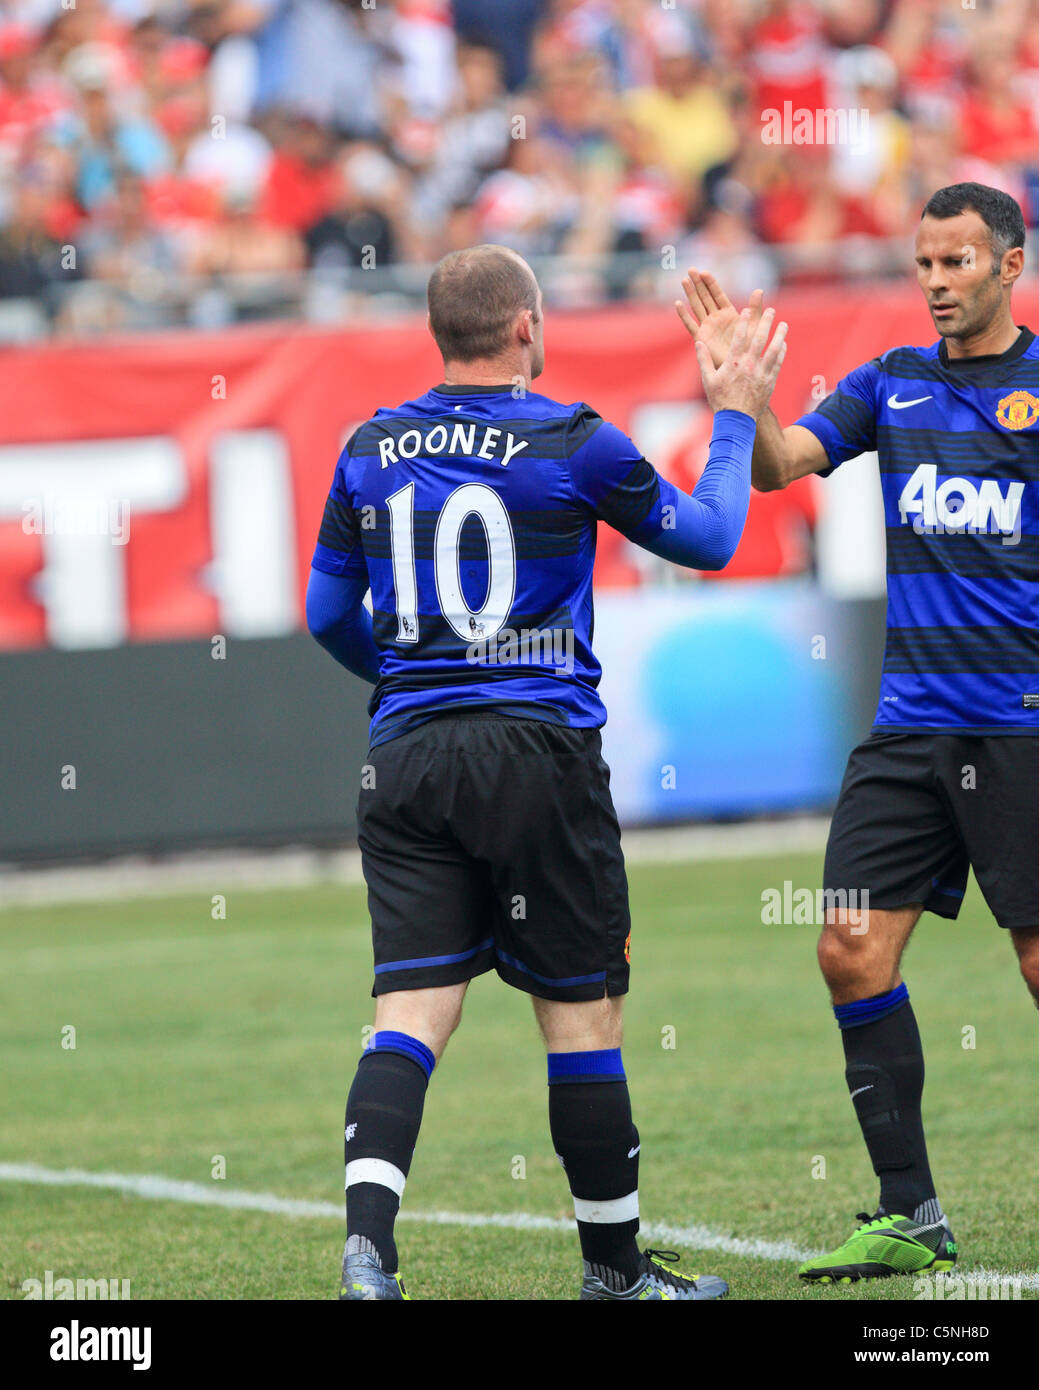 Manchester United mid-fielder, Ryan Giggs (R), congratulates striker, Wayne Rooney (10) on his goal vs. the Chicago Fire. Stock Photo